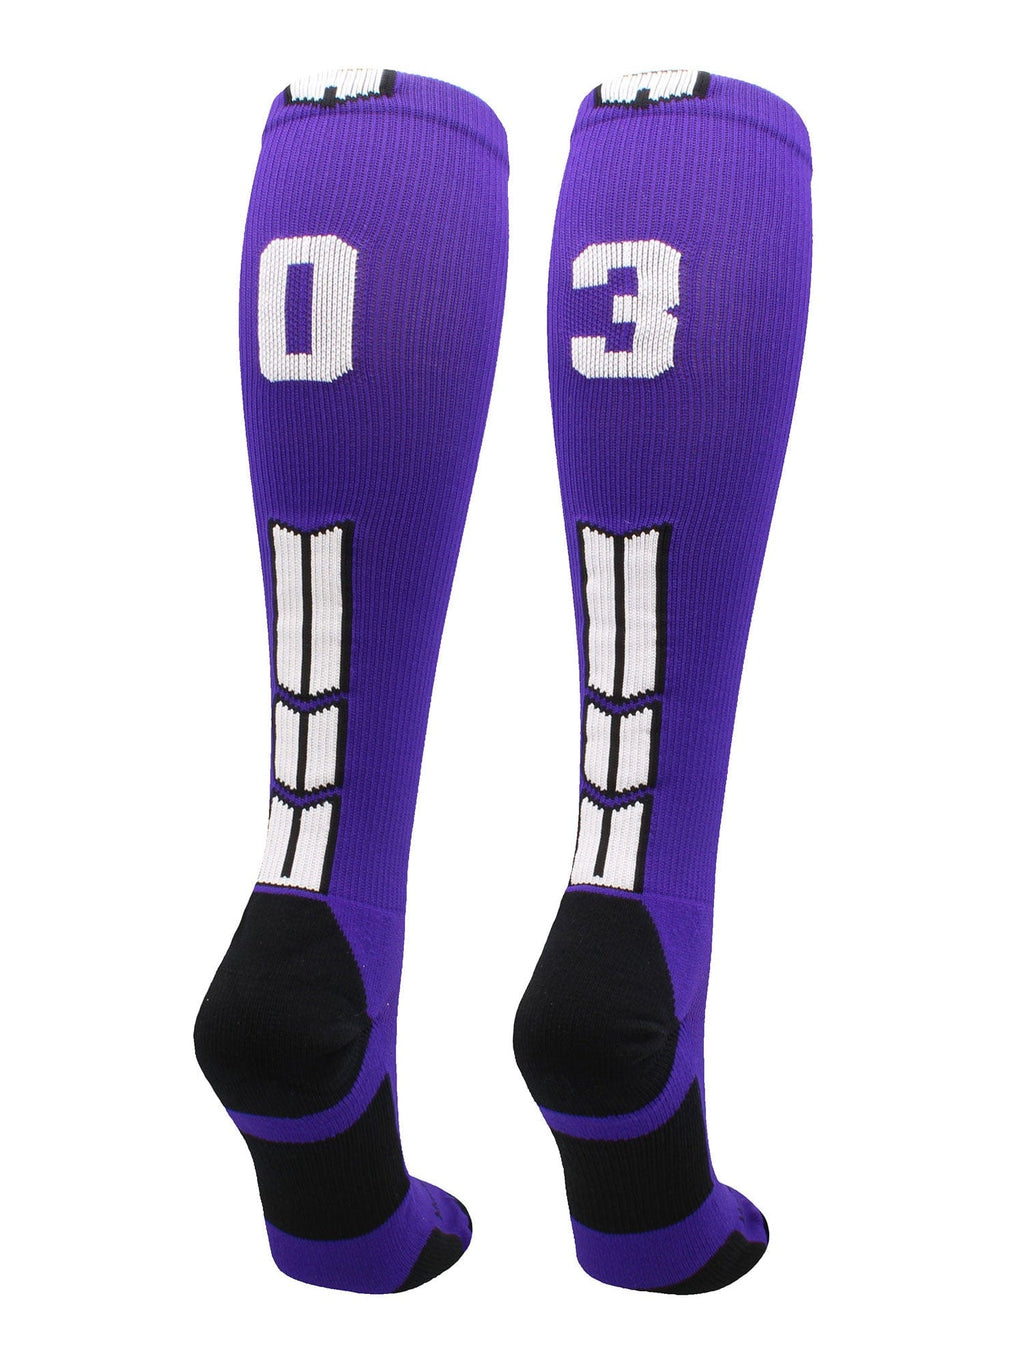 Player Id Jersey Number Socks Over the Calf Length Purple and White ...